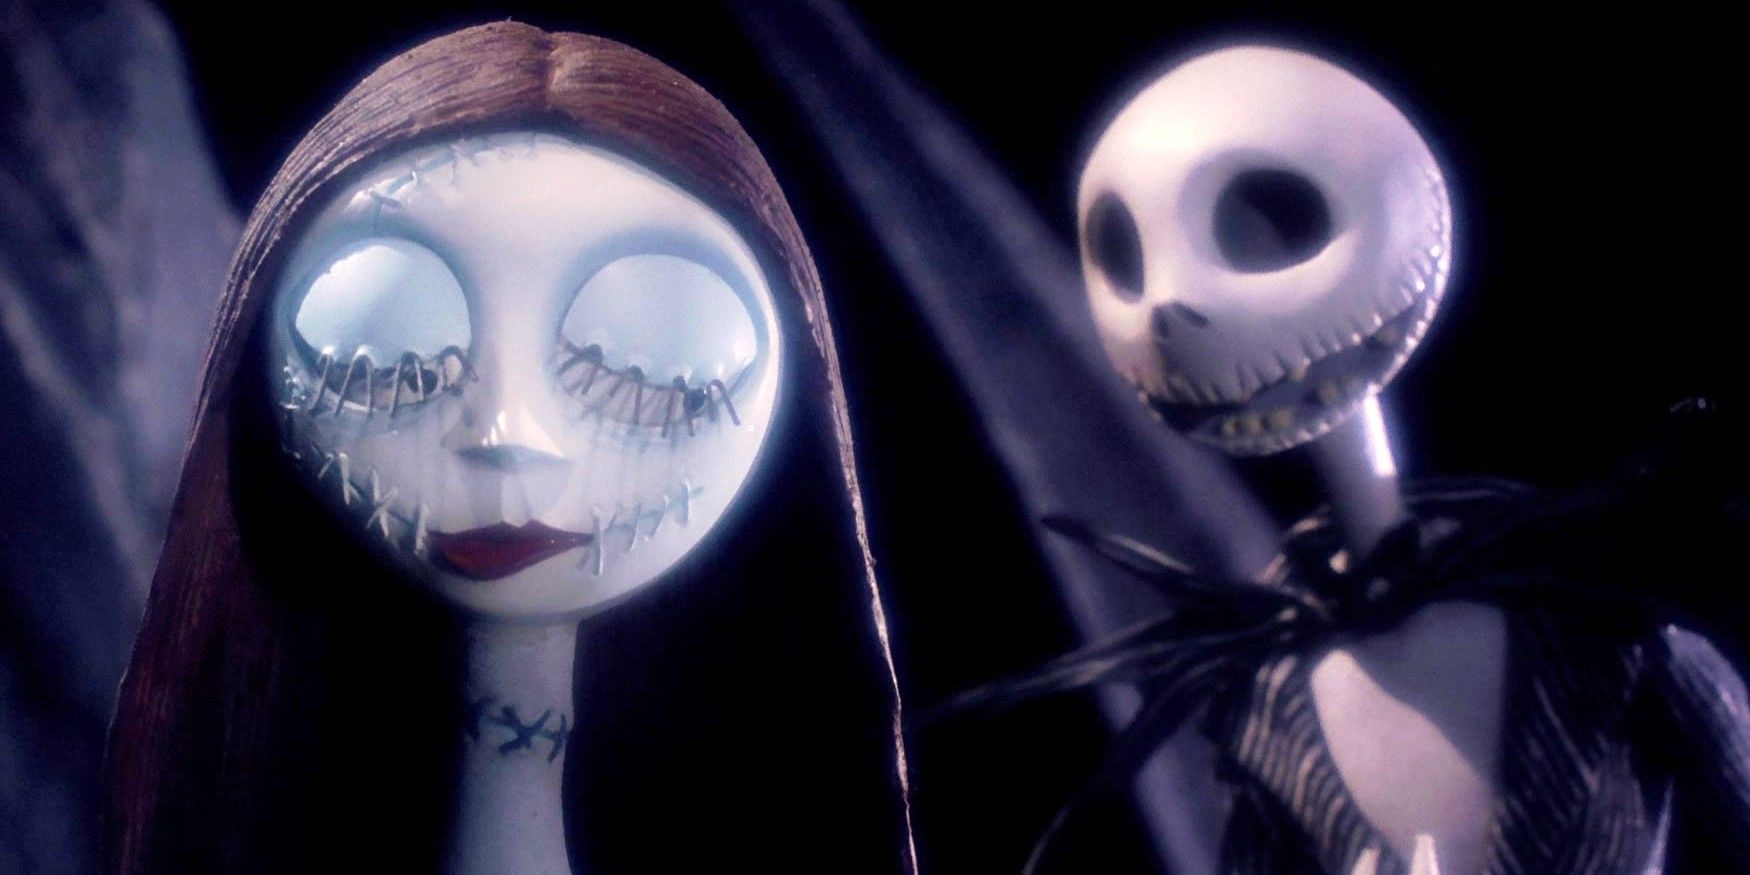 What Happened To Jack & Sally After Nightmare Before Christmas Ended